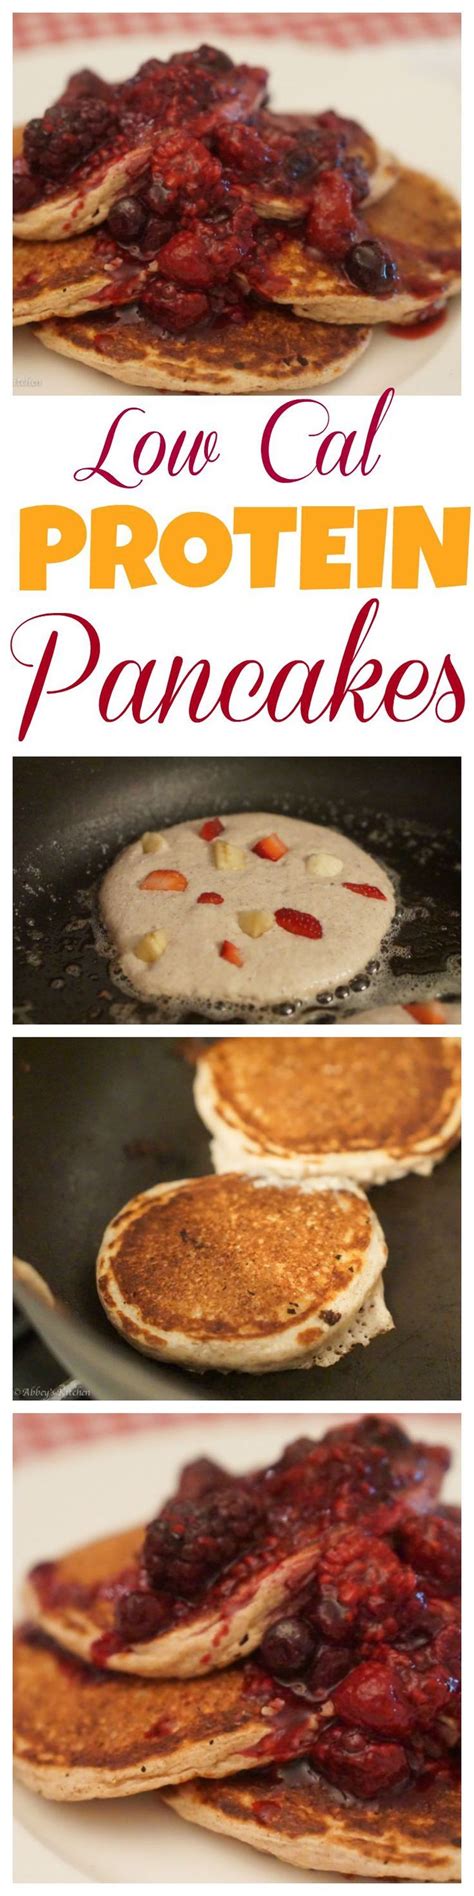 Almonds 1 cup cranberry juice Super healthy low calorie high fibre protein pancakes made ...